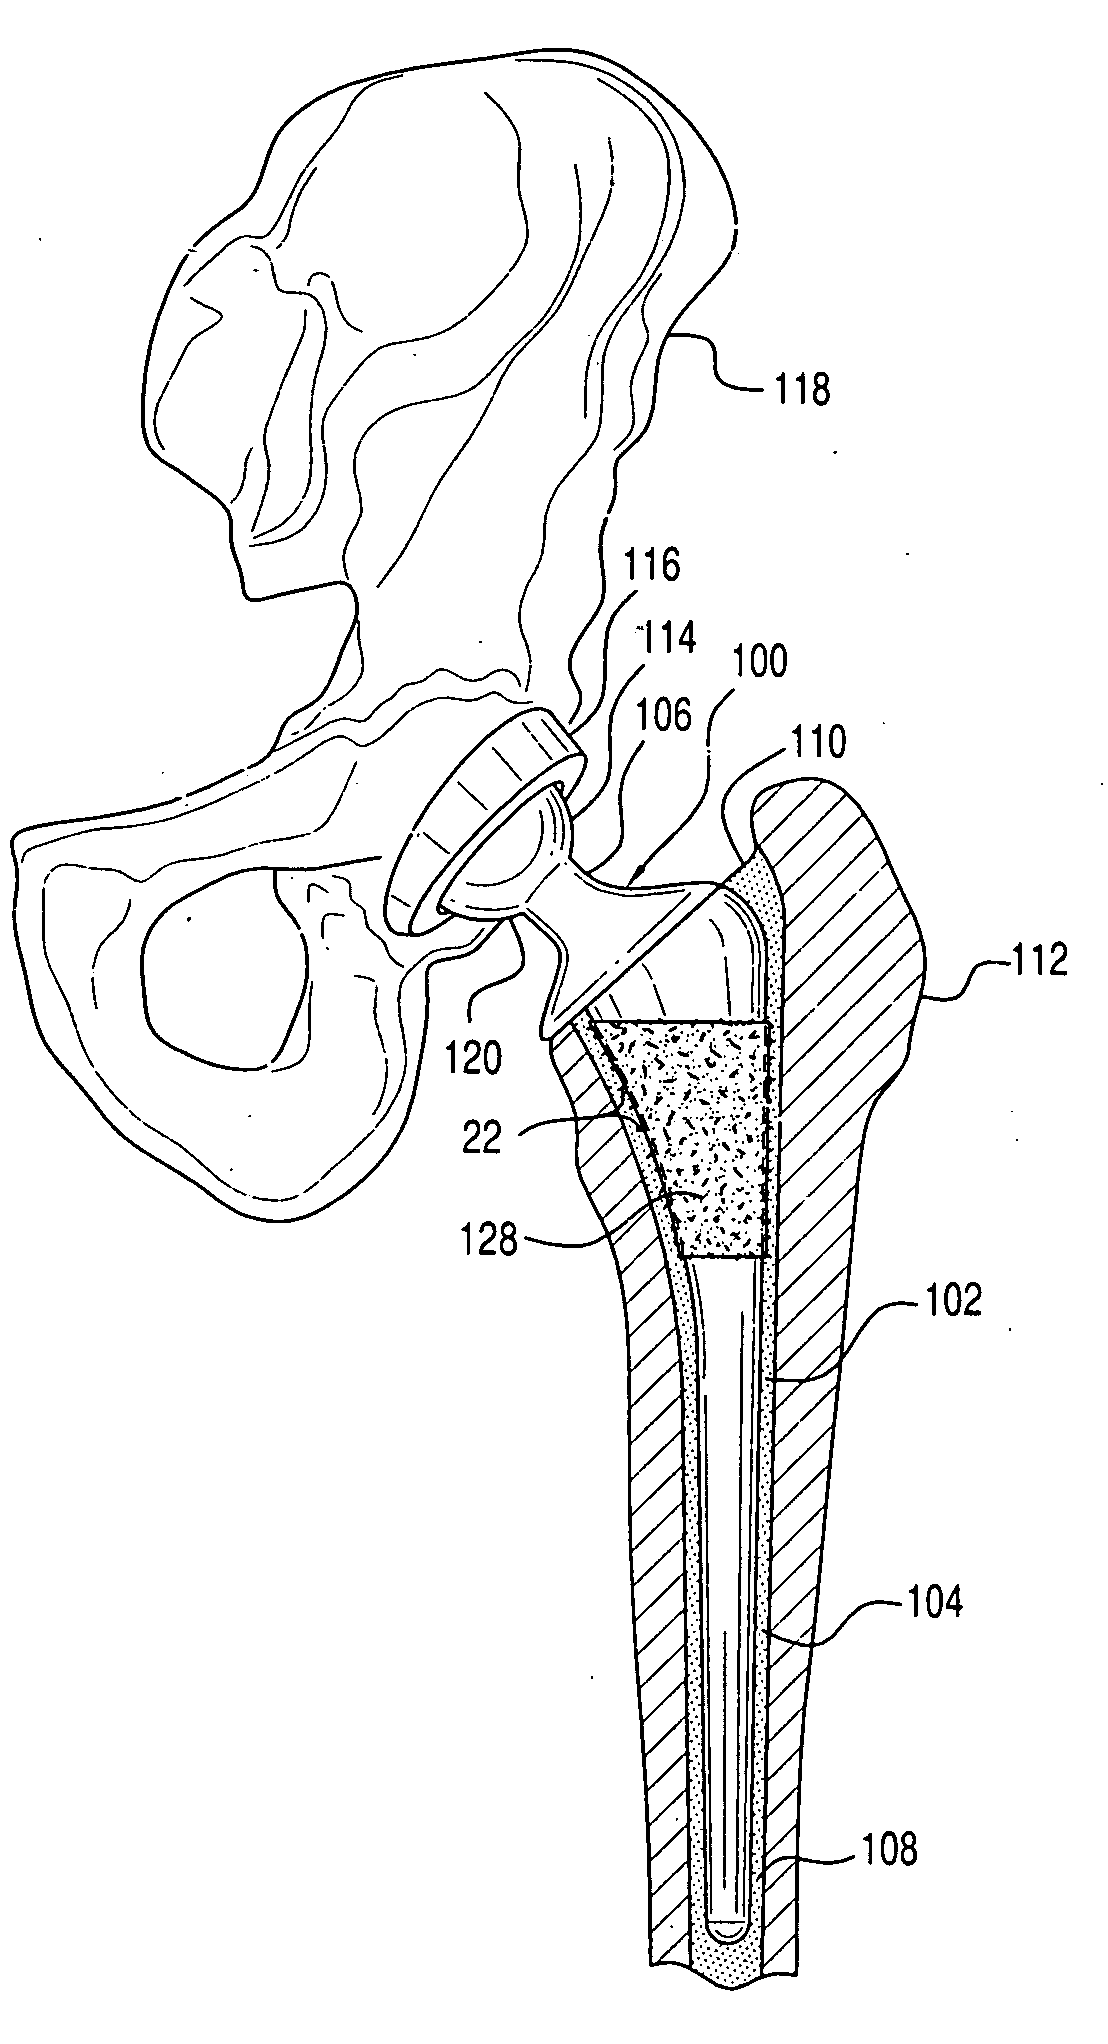 Bone graft composition, method and implant